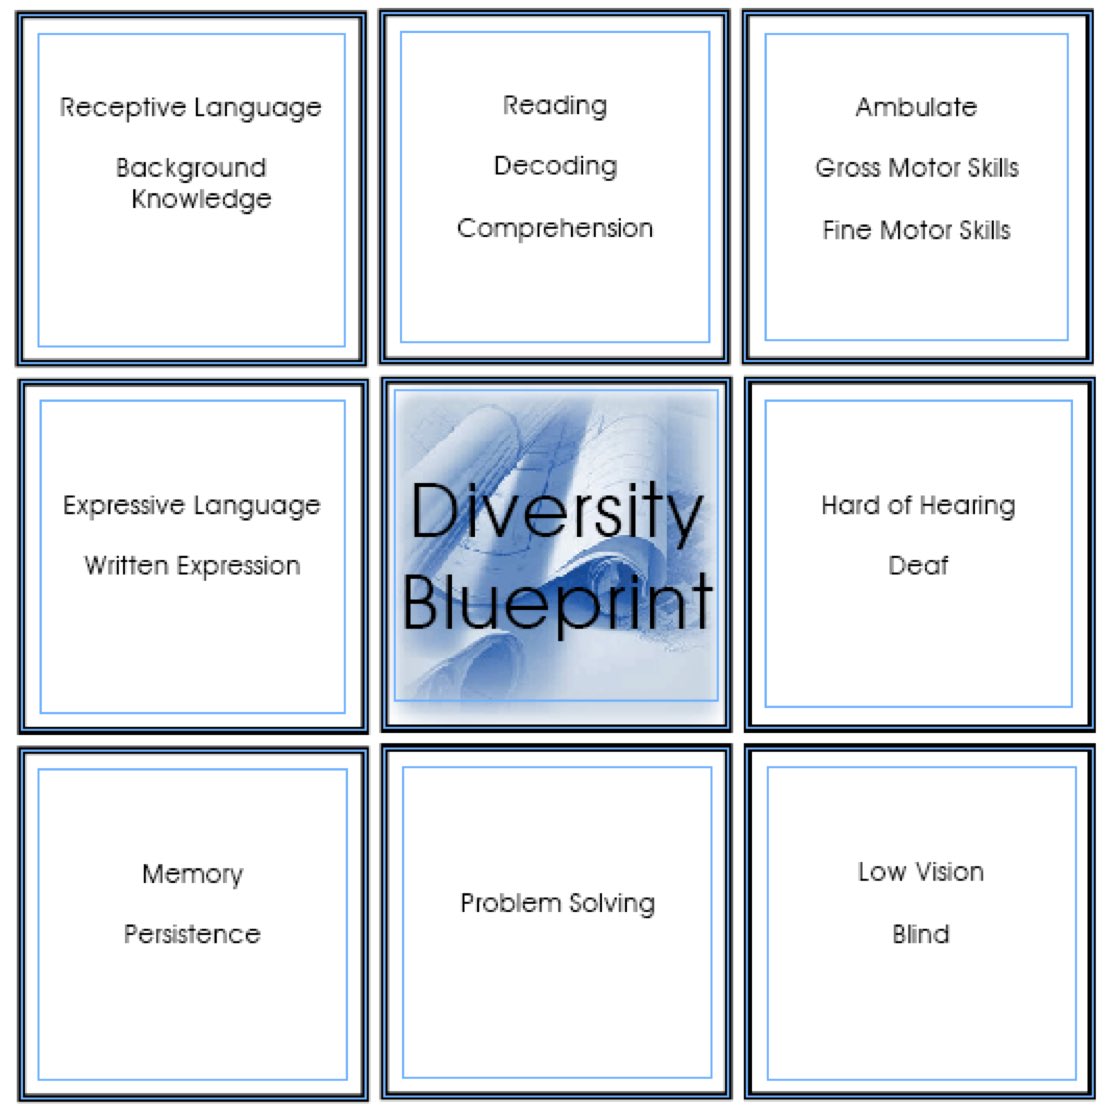 @hillary_atp I also refer to Edyburn’s blueprint of diversity #ATchat